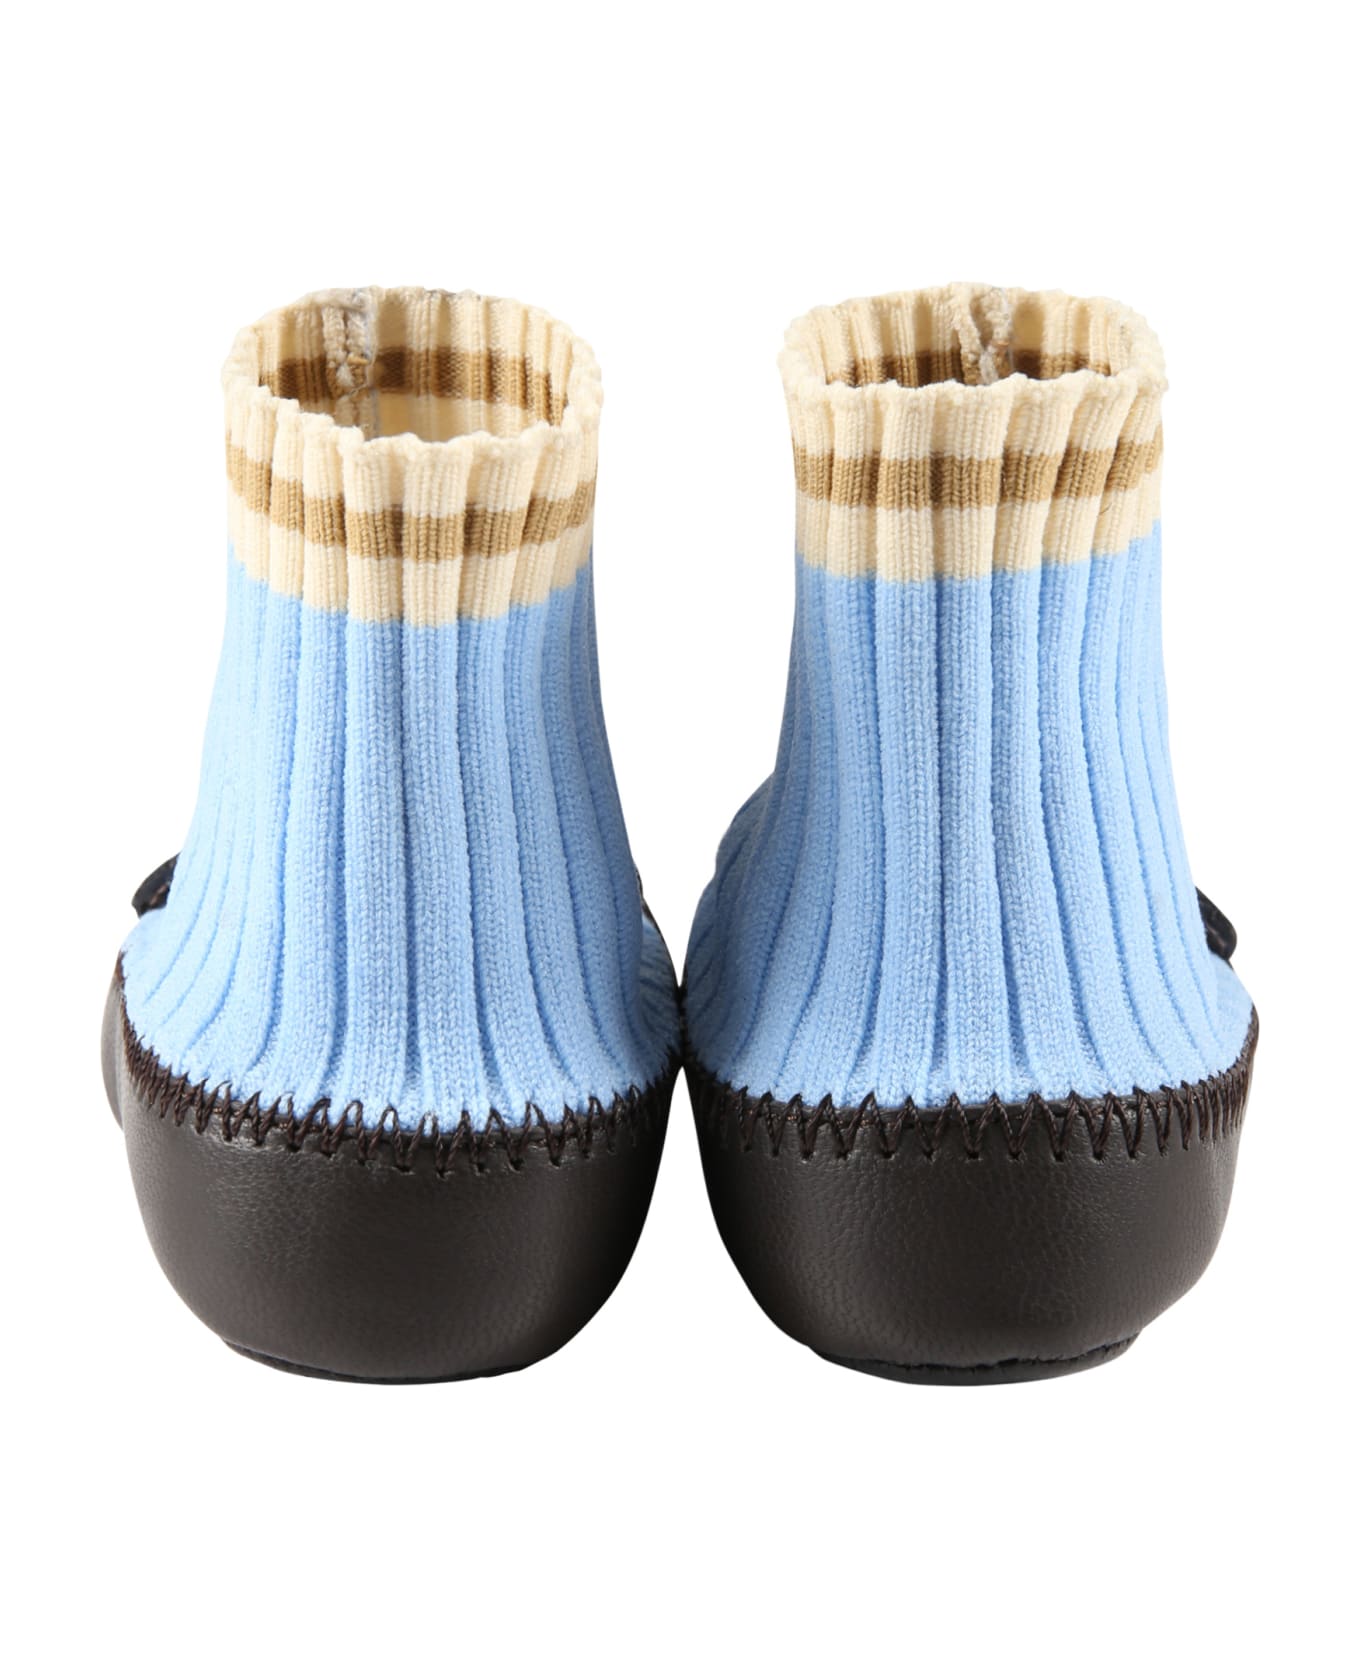 Fendi Light-blue Sneakers For Baby Boy With Ff - Light Blue